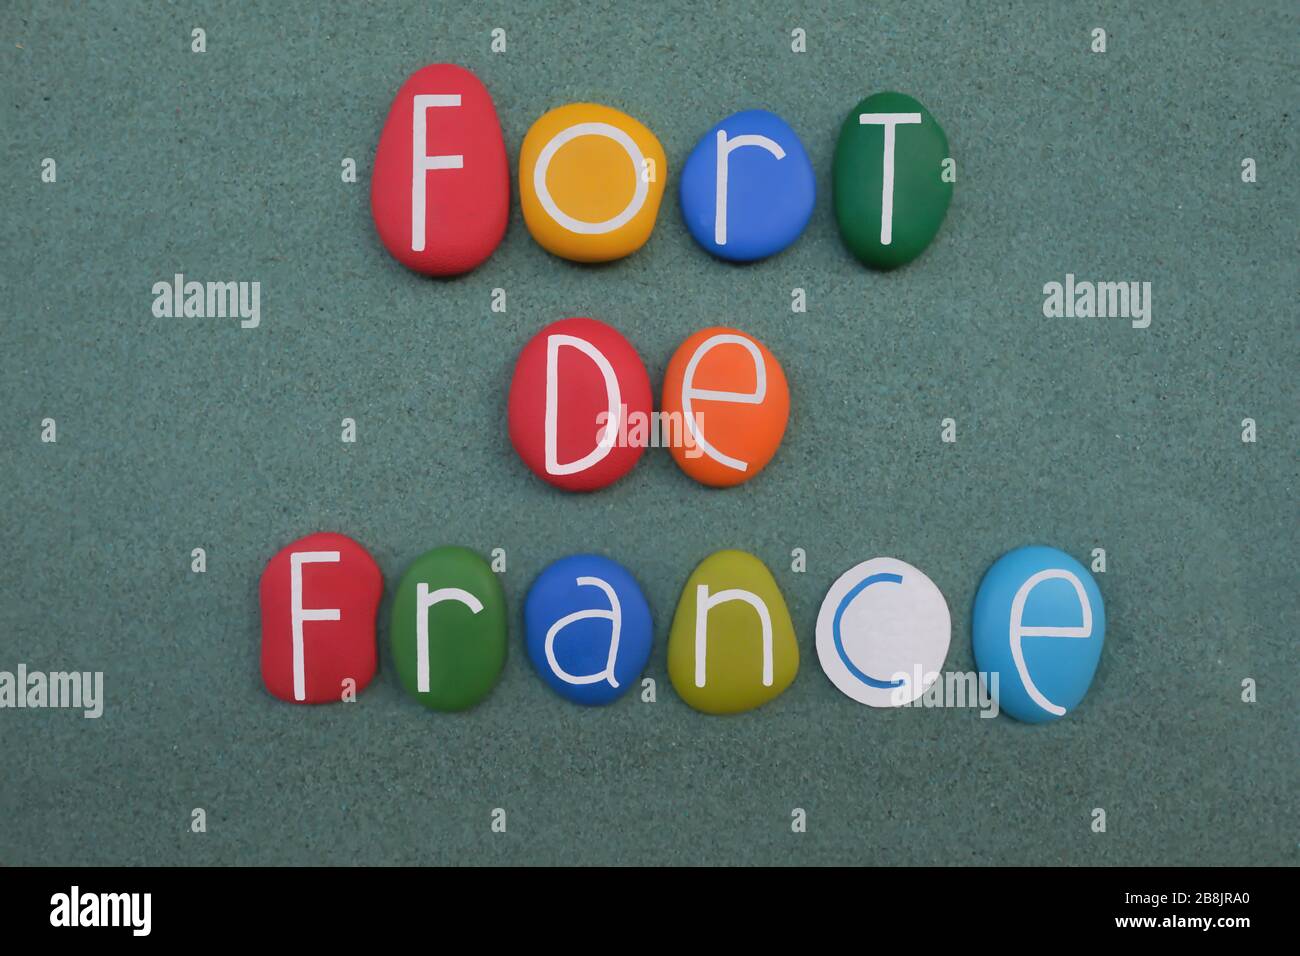 Fort-de-France, capital city of Martinique, an overseas department of France located in the Caribbean, souvenir with multi colored stone letters Stock Photo